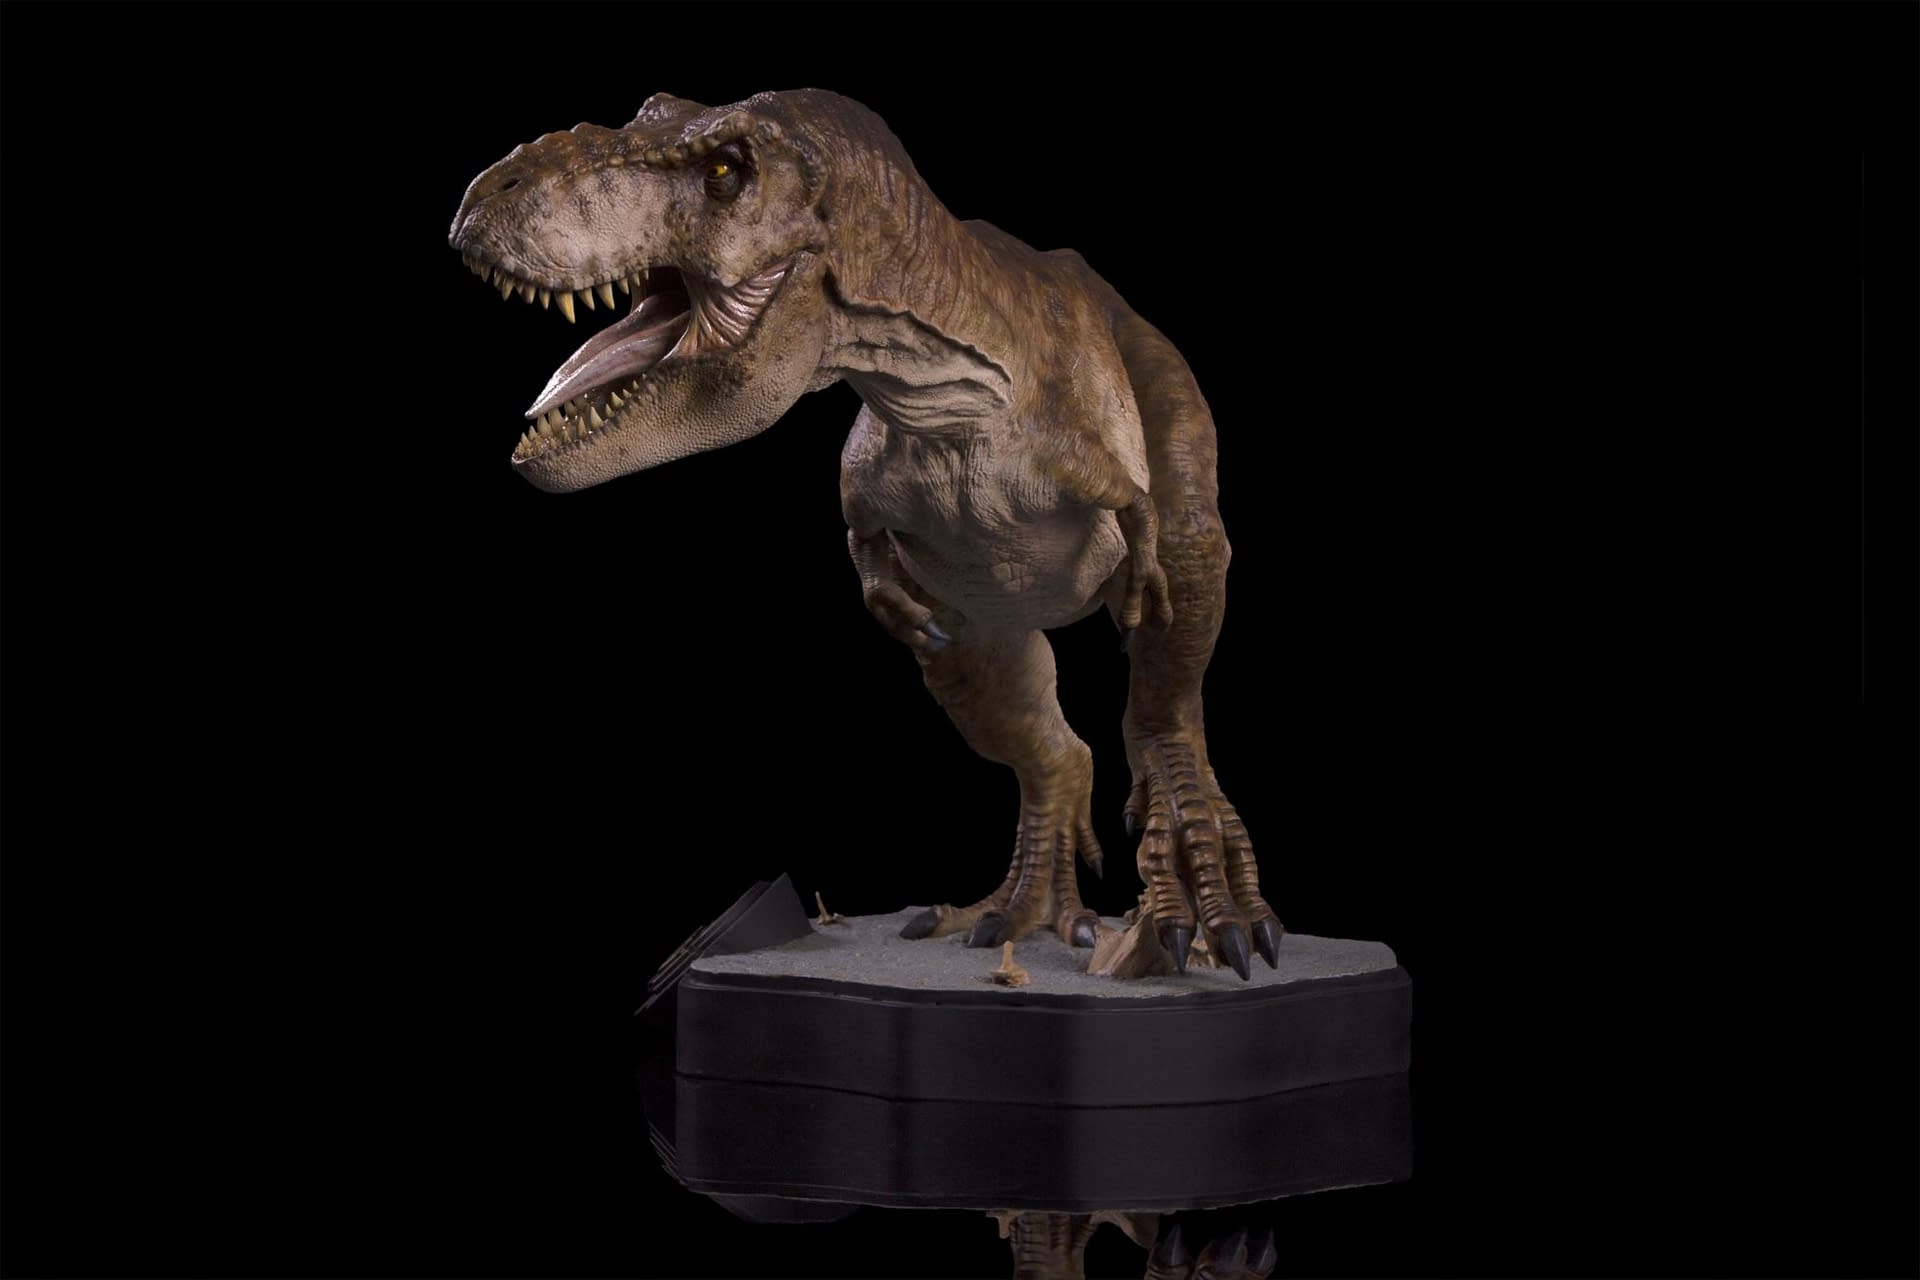 "Jurassic World" T-Rex is on the Loose with New Chronicle Statue 